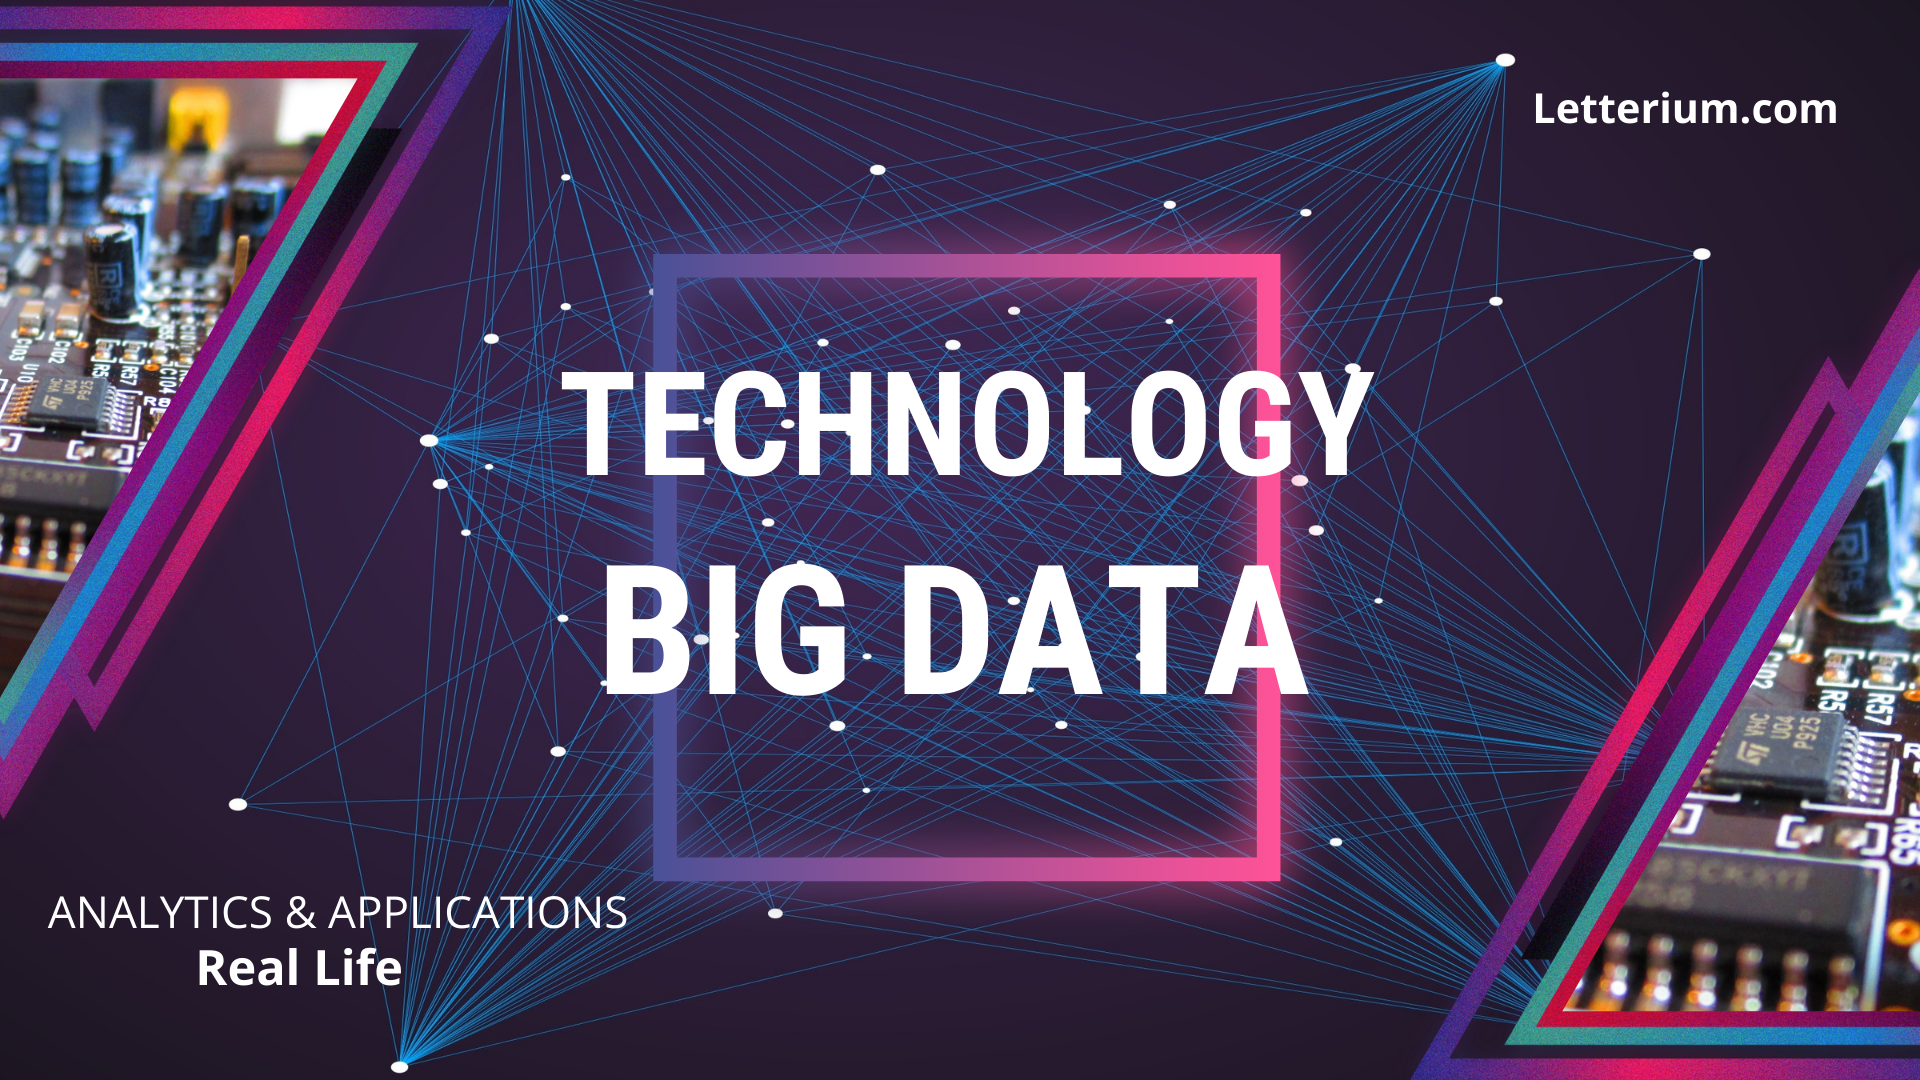 Big Data What Is Big Data Analytics, Challenges and Applications in Technology & Real Life